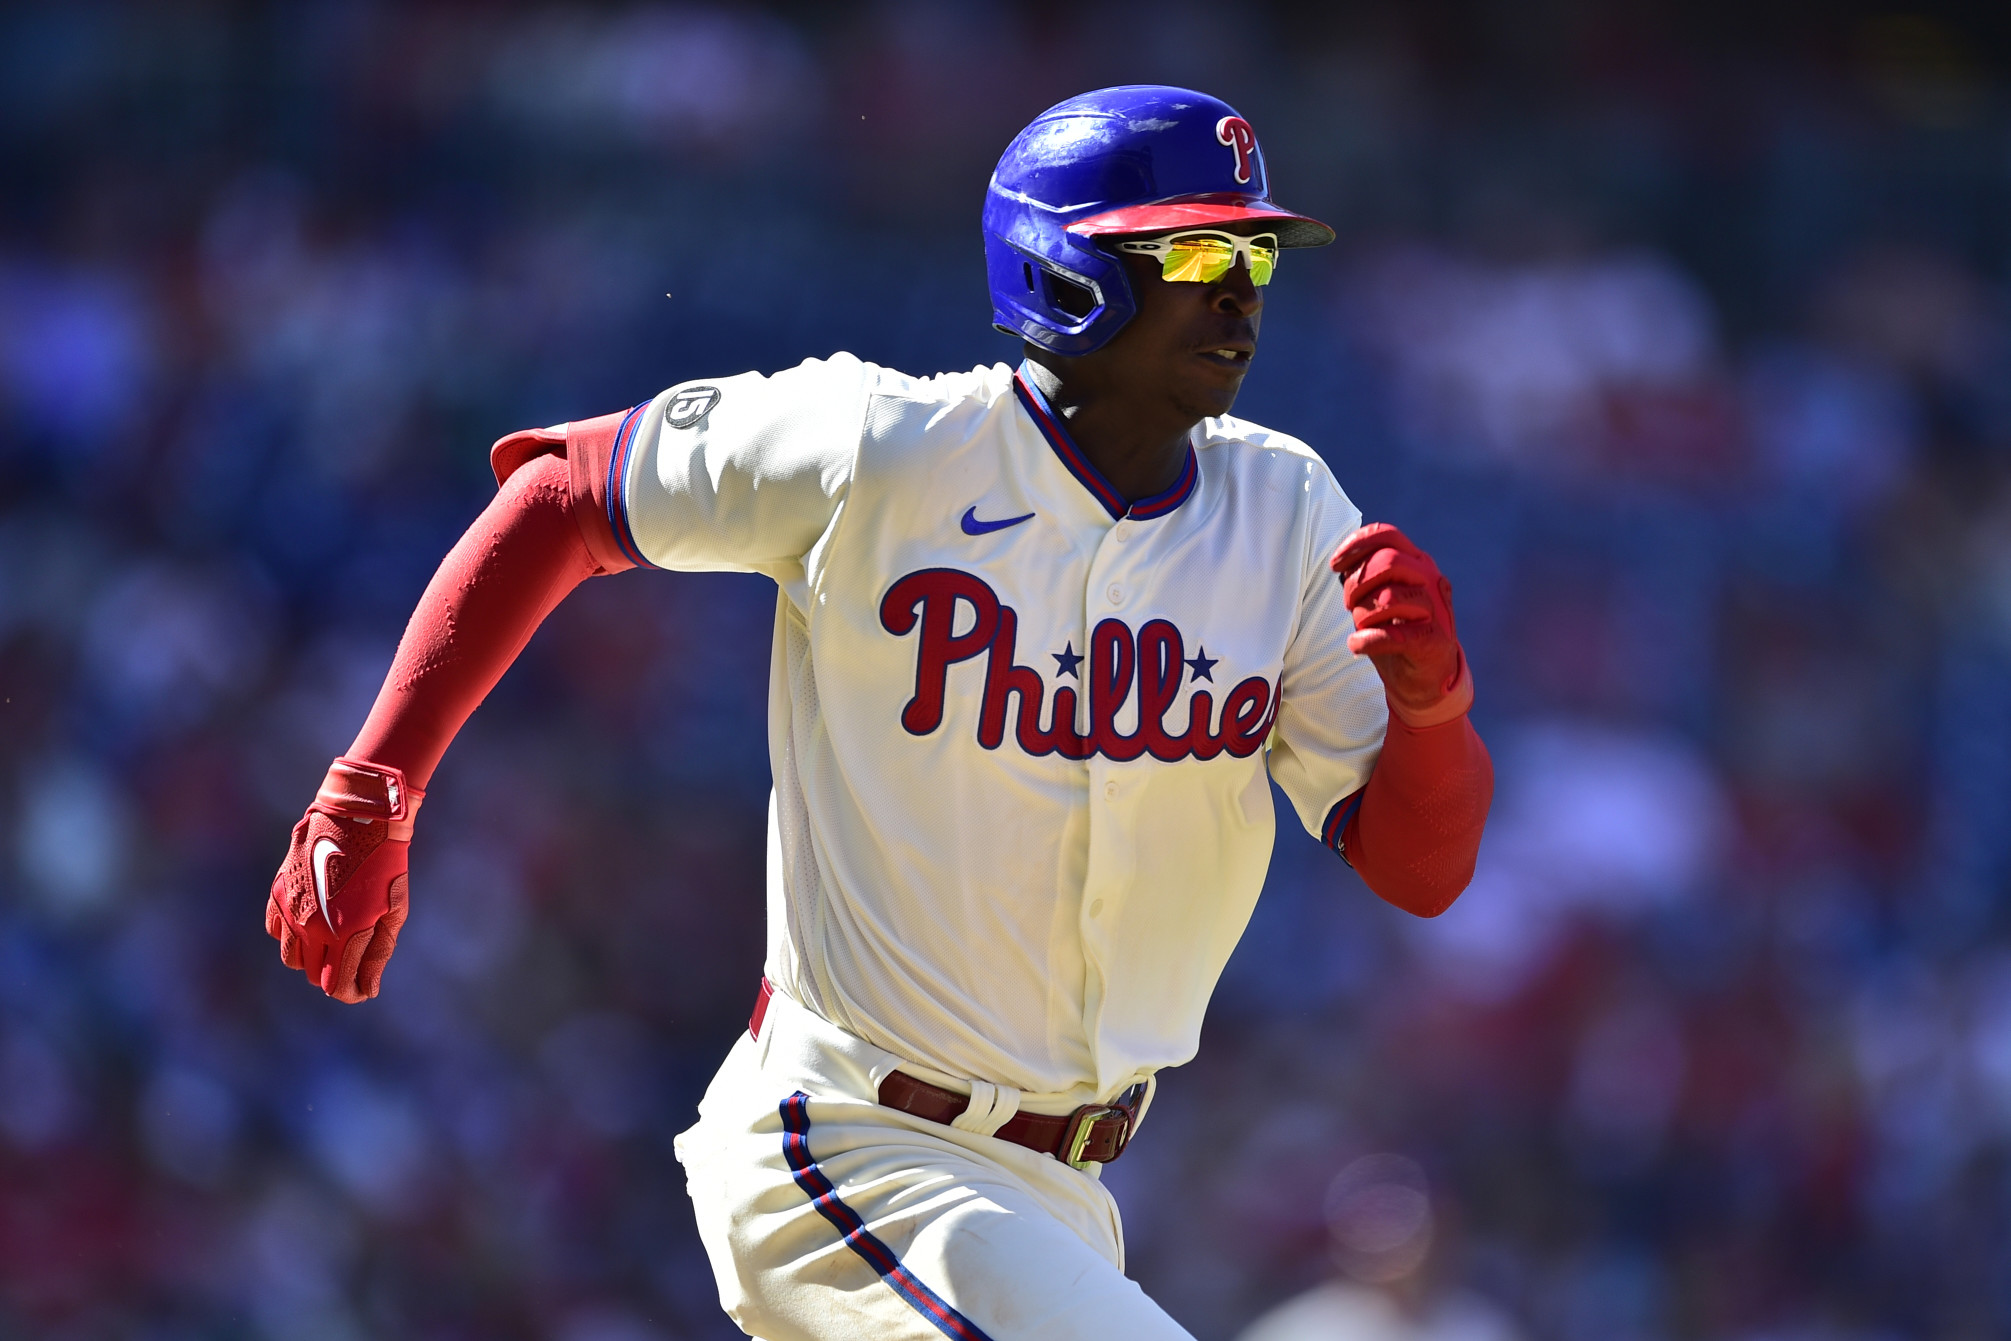 MLB Network on X: BREAKING: The @Phillies have reportedly agreed